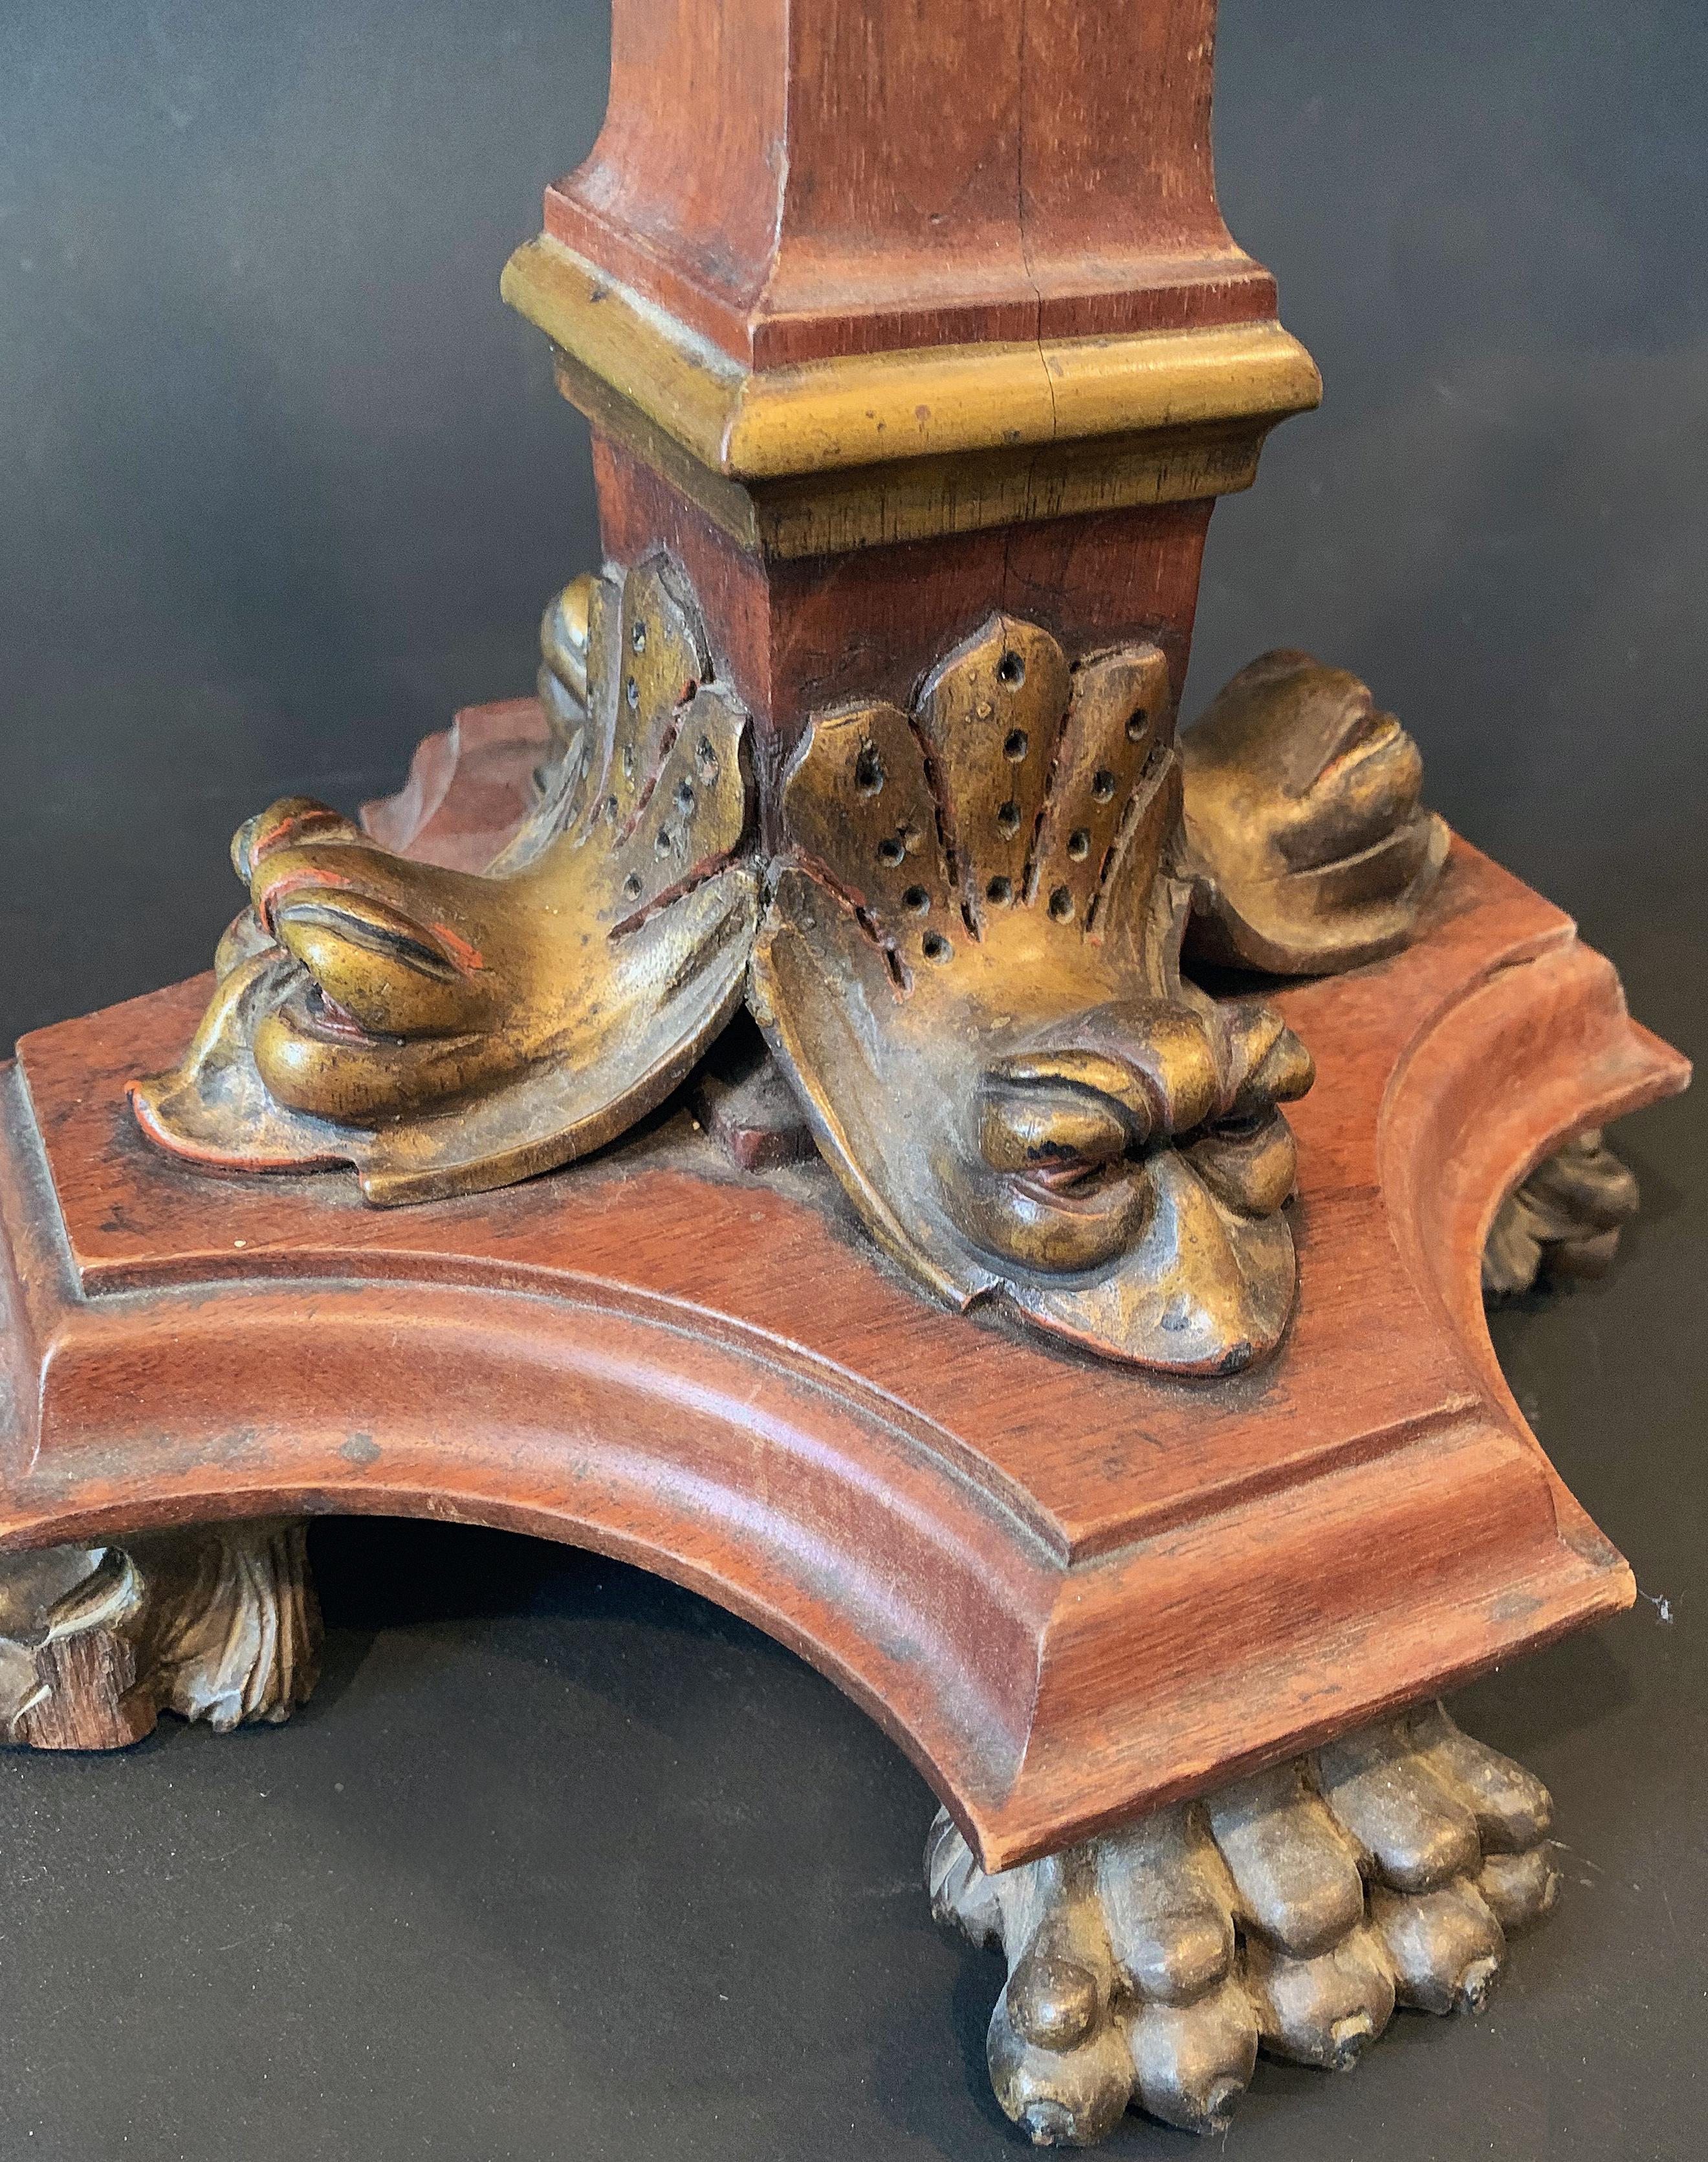 Beautifully carved and finished, this Renaissance Revival lamp base features hairy paw feet, gilded dauphins in the 18th century French manner, fruited garlands midway up the lamp shaft, and a torch at the top, all executed in a warm mahogany.